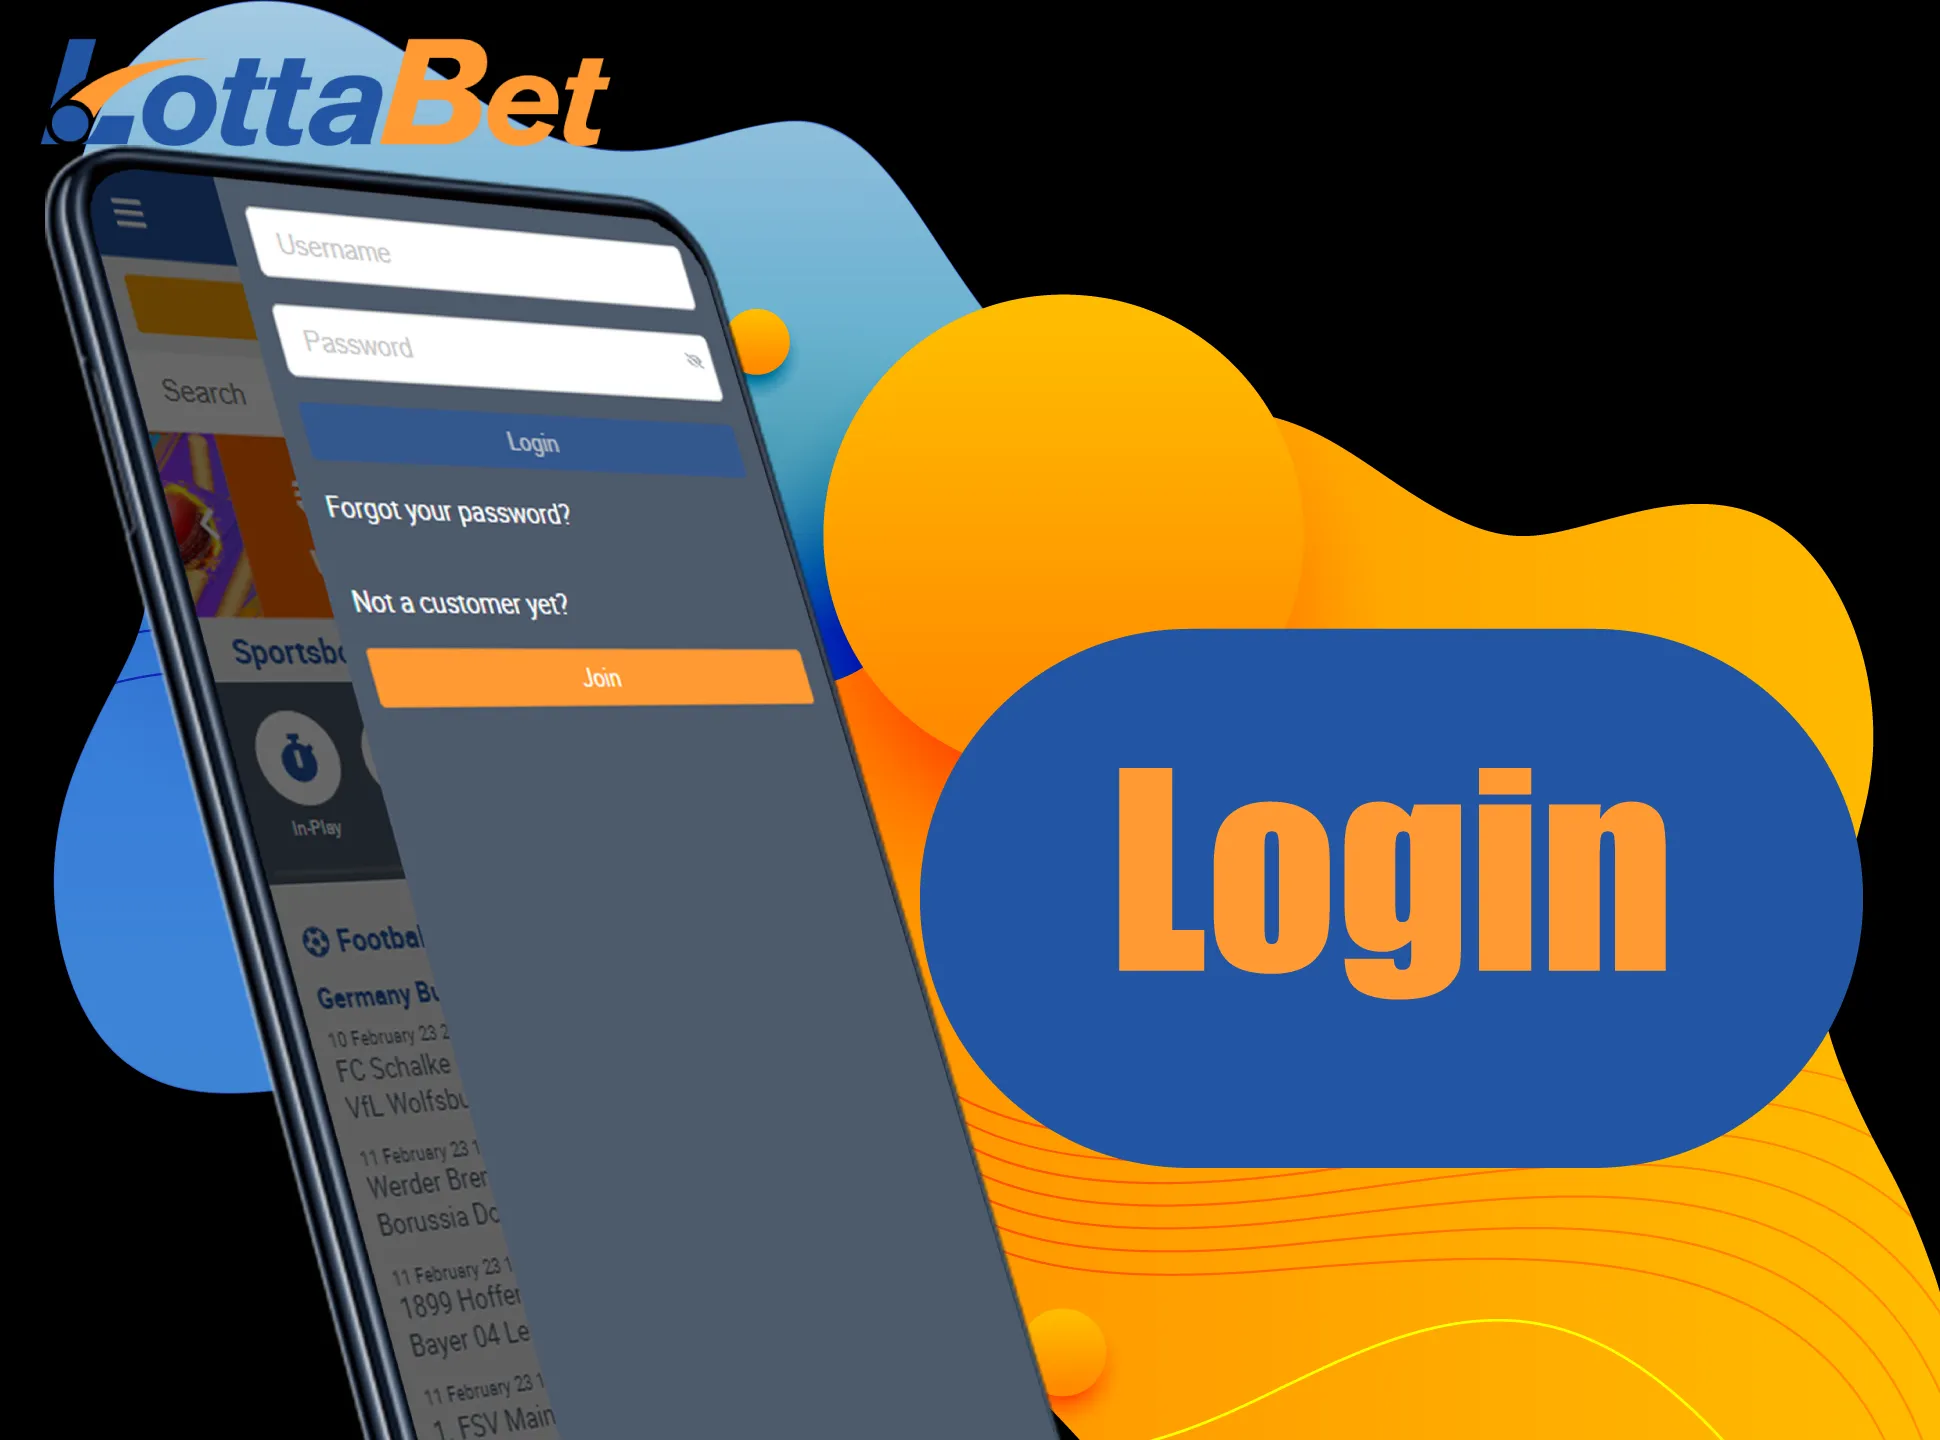 Log in to your Lottabet account with a username and password.